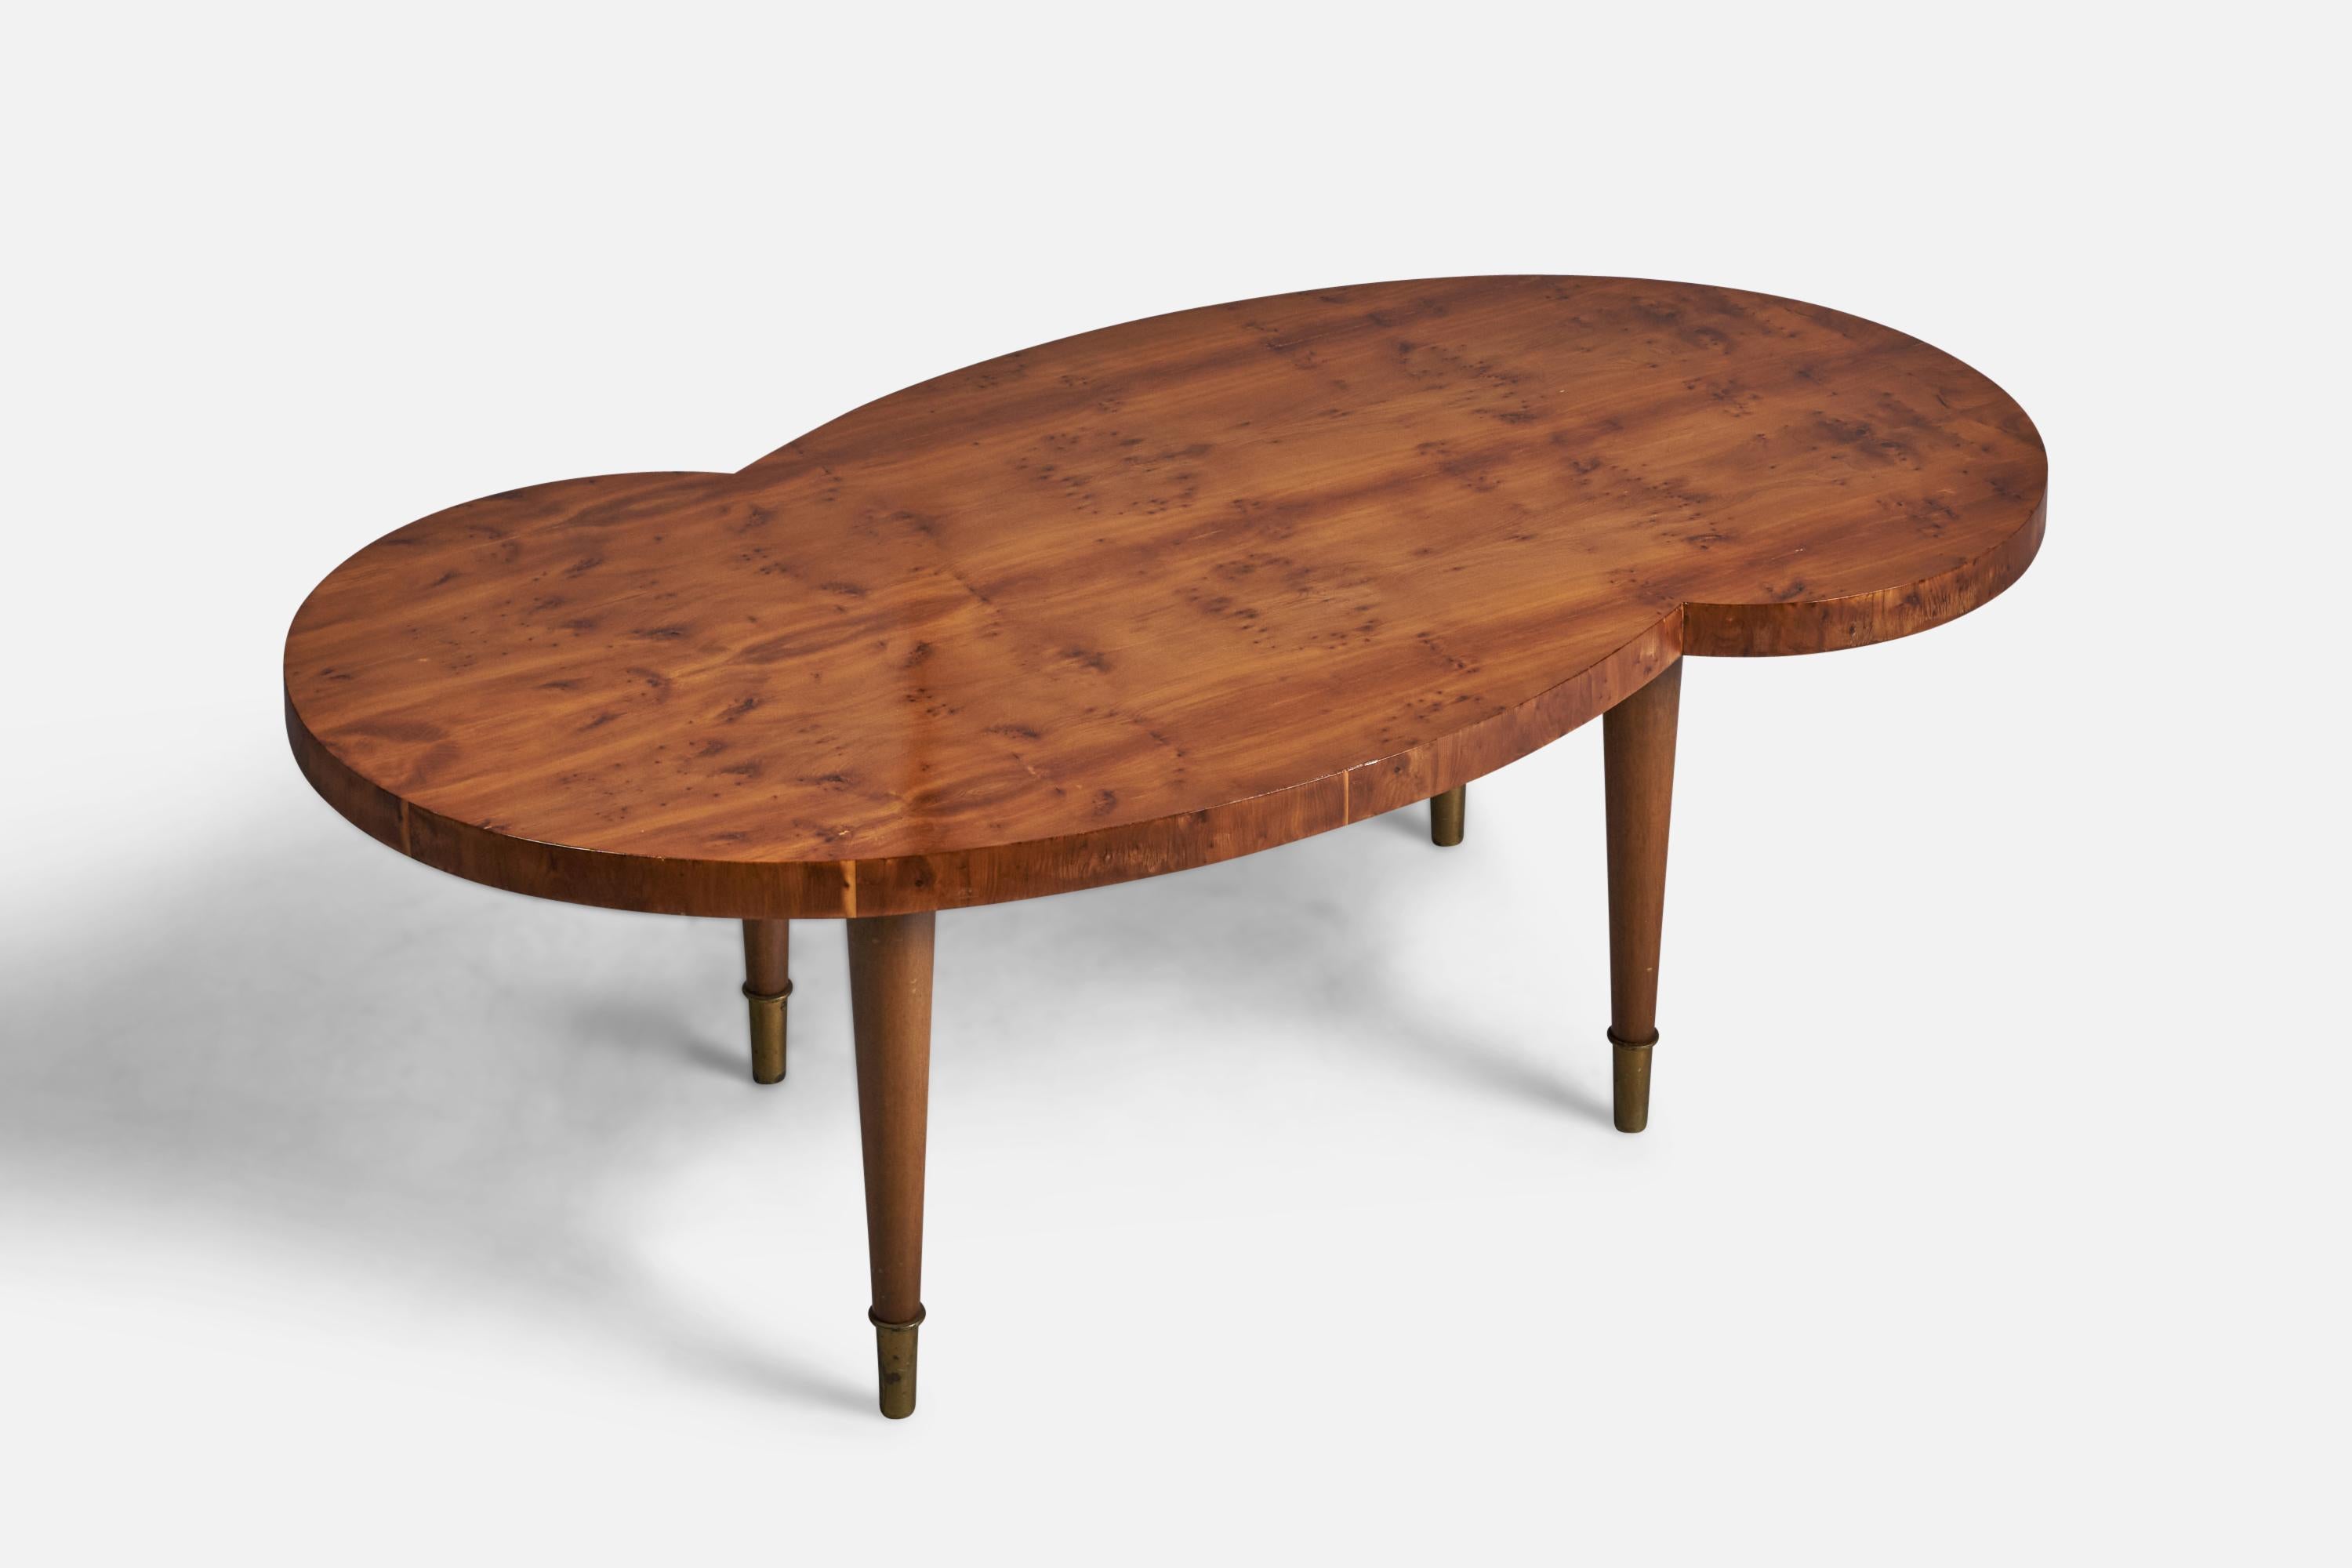 A freeform mahogany, mahogany burl veneer and brass coffee or cocktail table, designed by Tommi Parzinger and produced by Charak Modern, USA, 1950s.